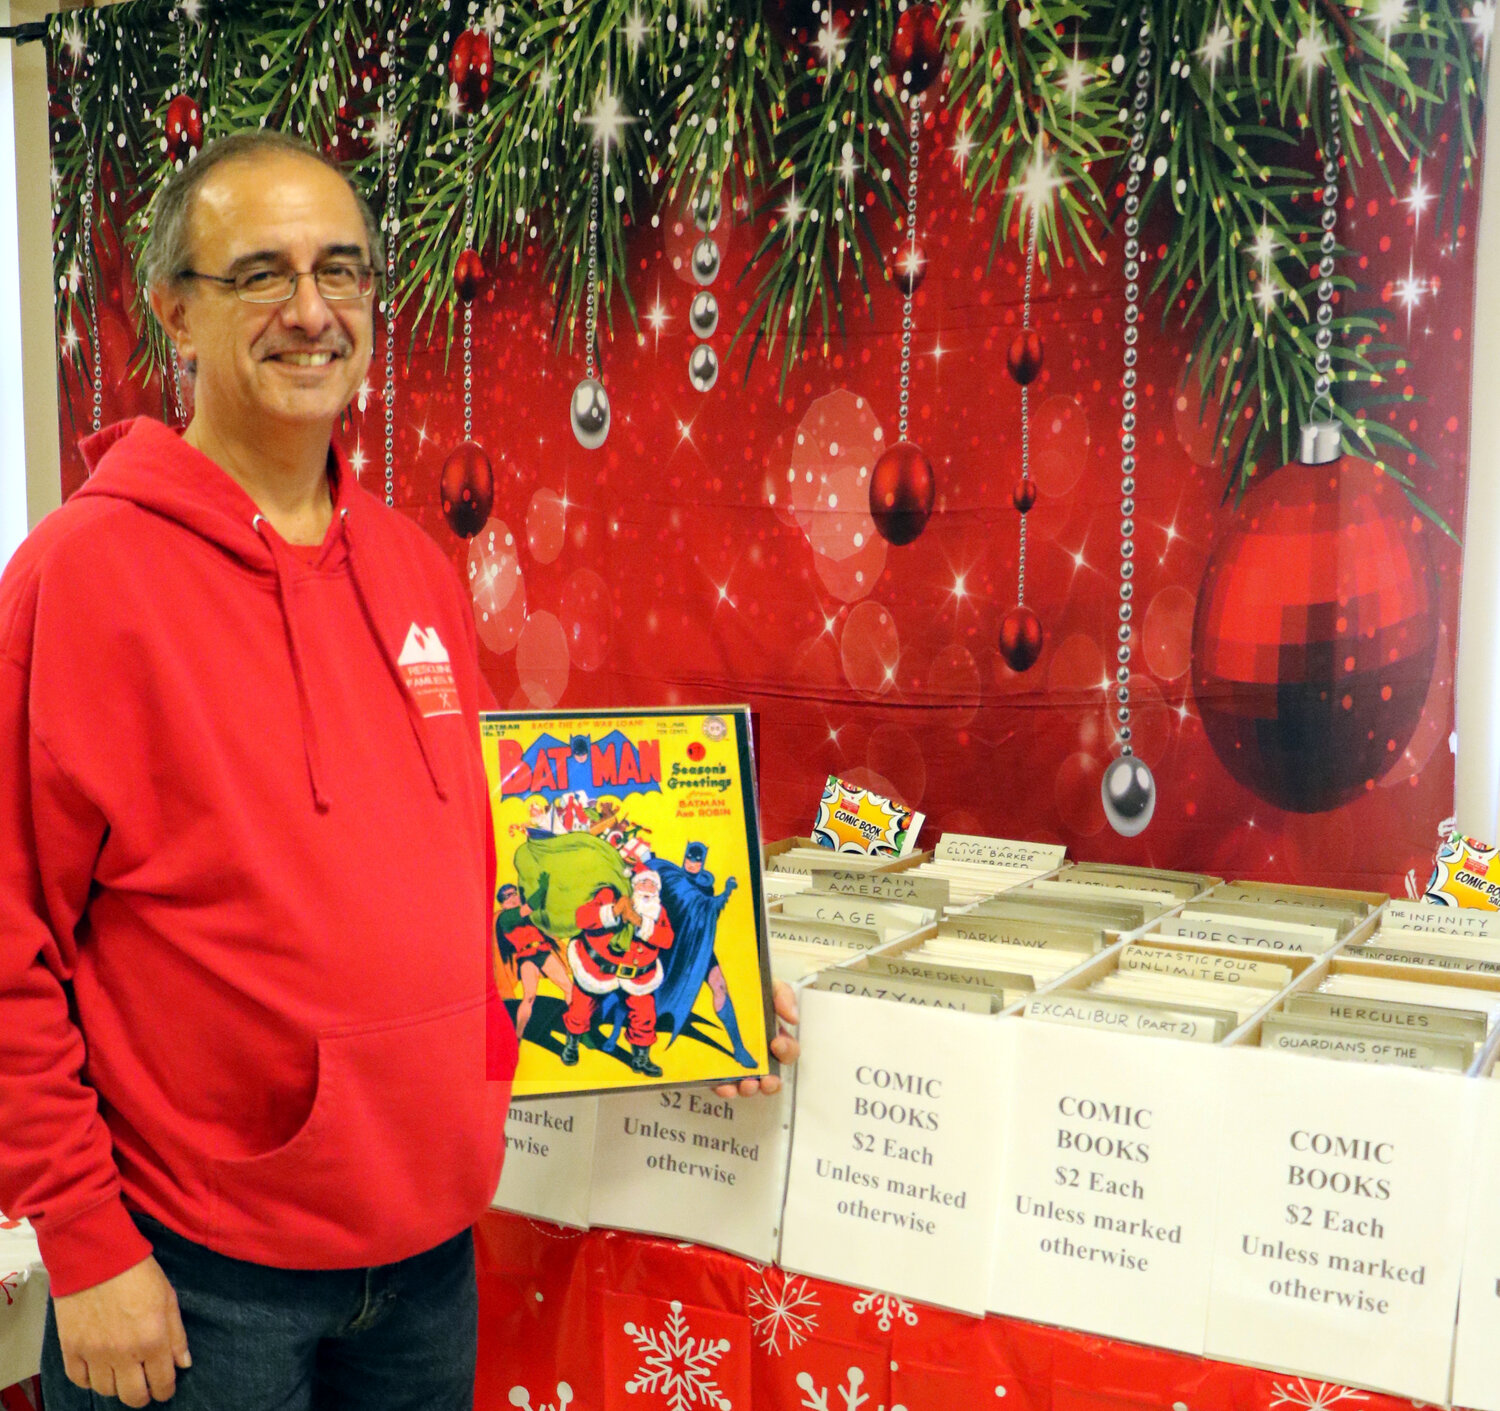 Joe Pormigiano helped sell comic books at the boutique at the Veterans of Foreign Wars Post 2718 in Franklin Square last weekend with a wide selection of comics.